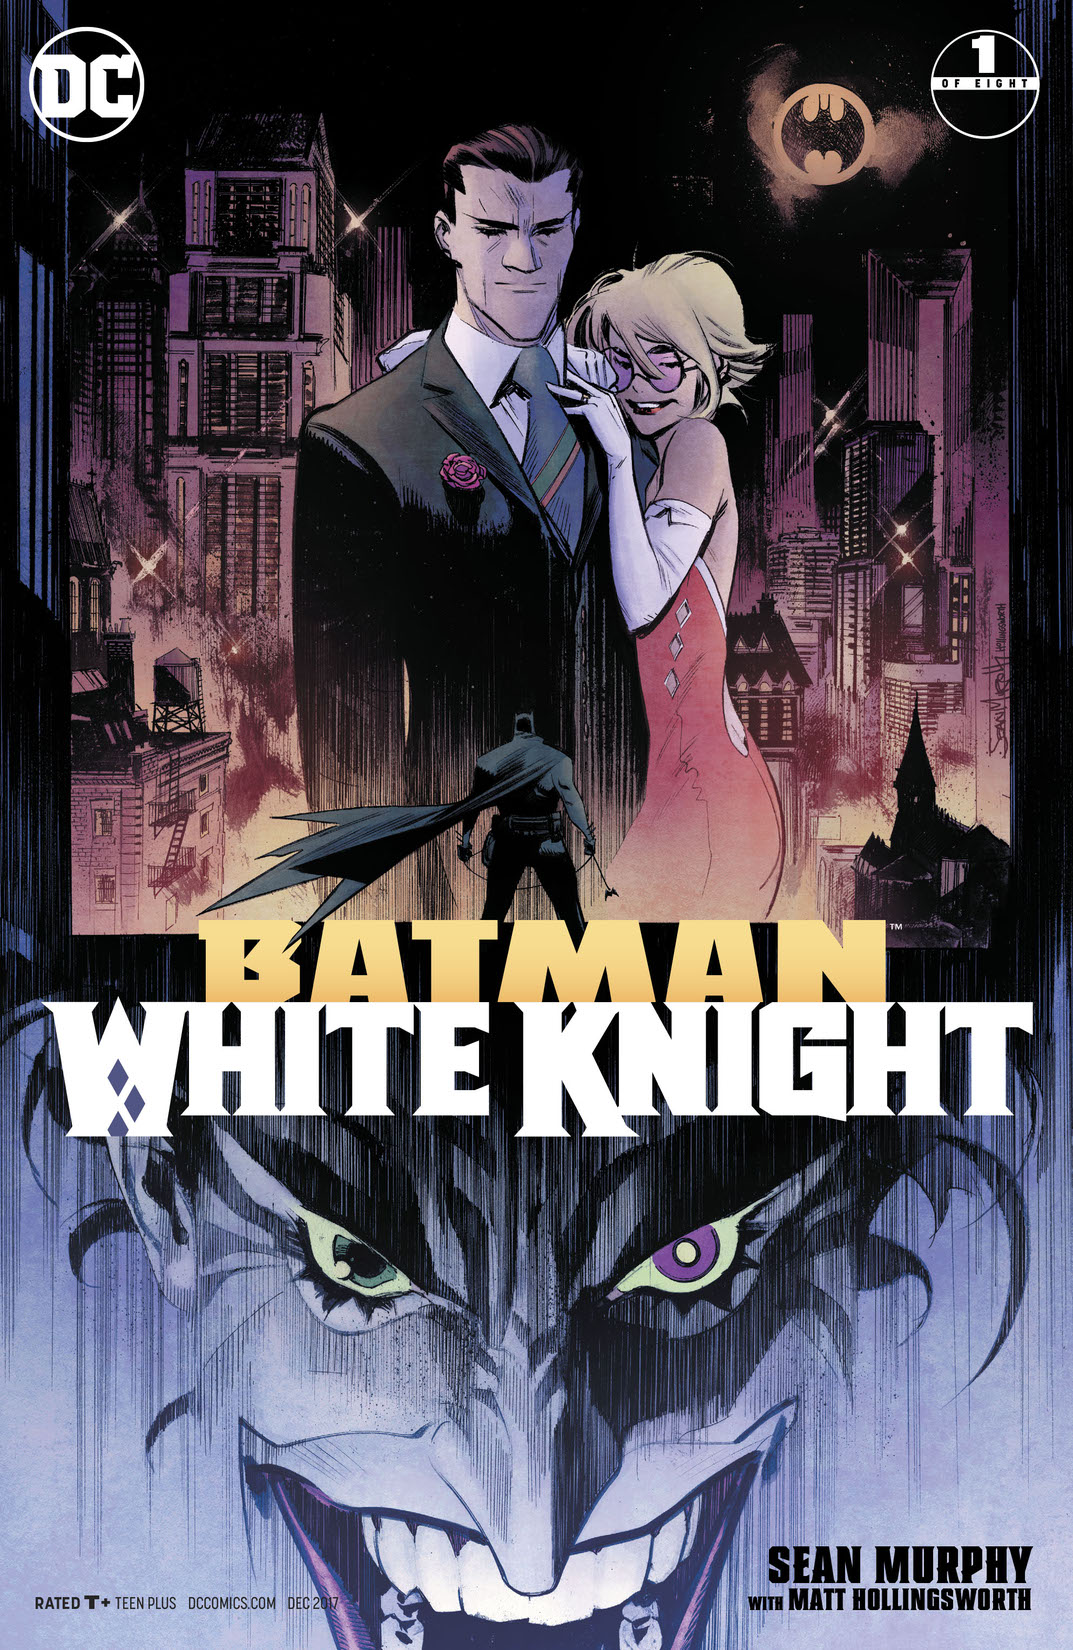 Batman: White Knight #1 preview images